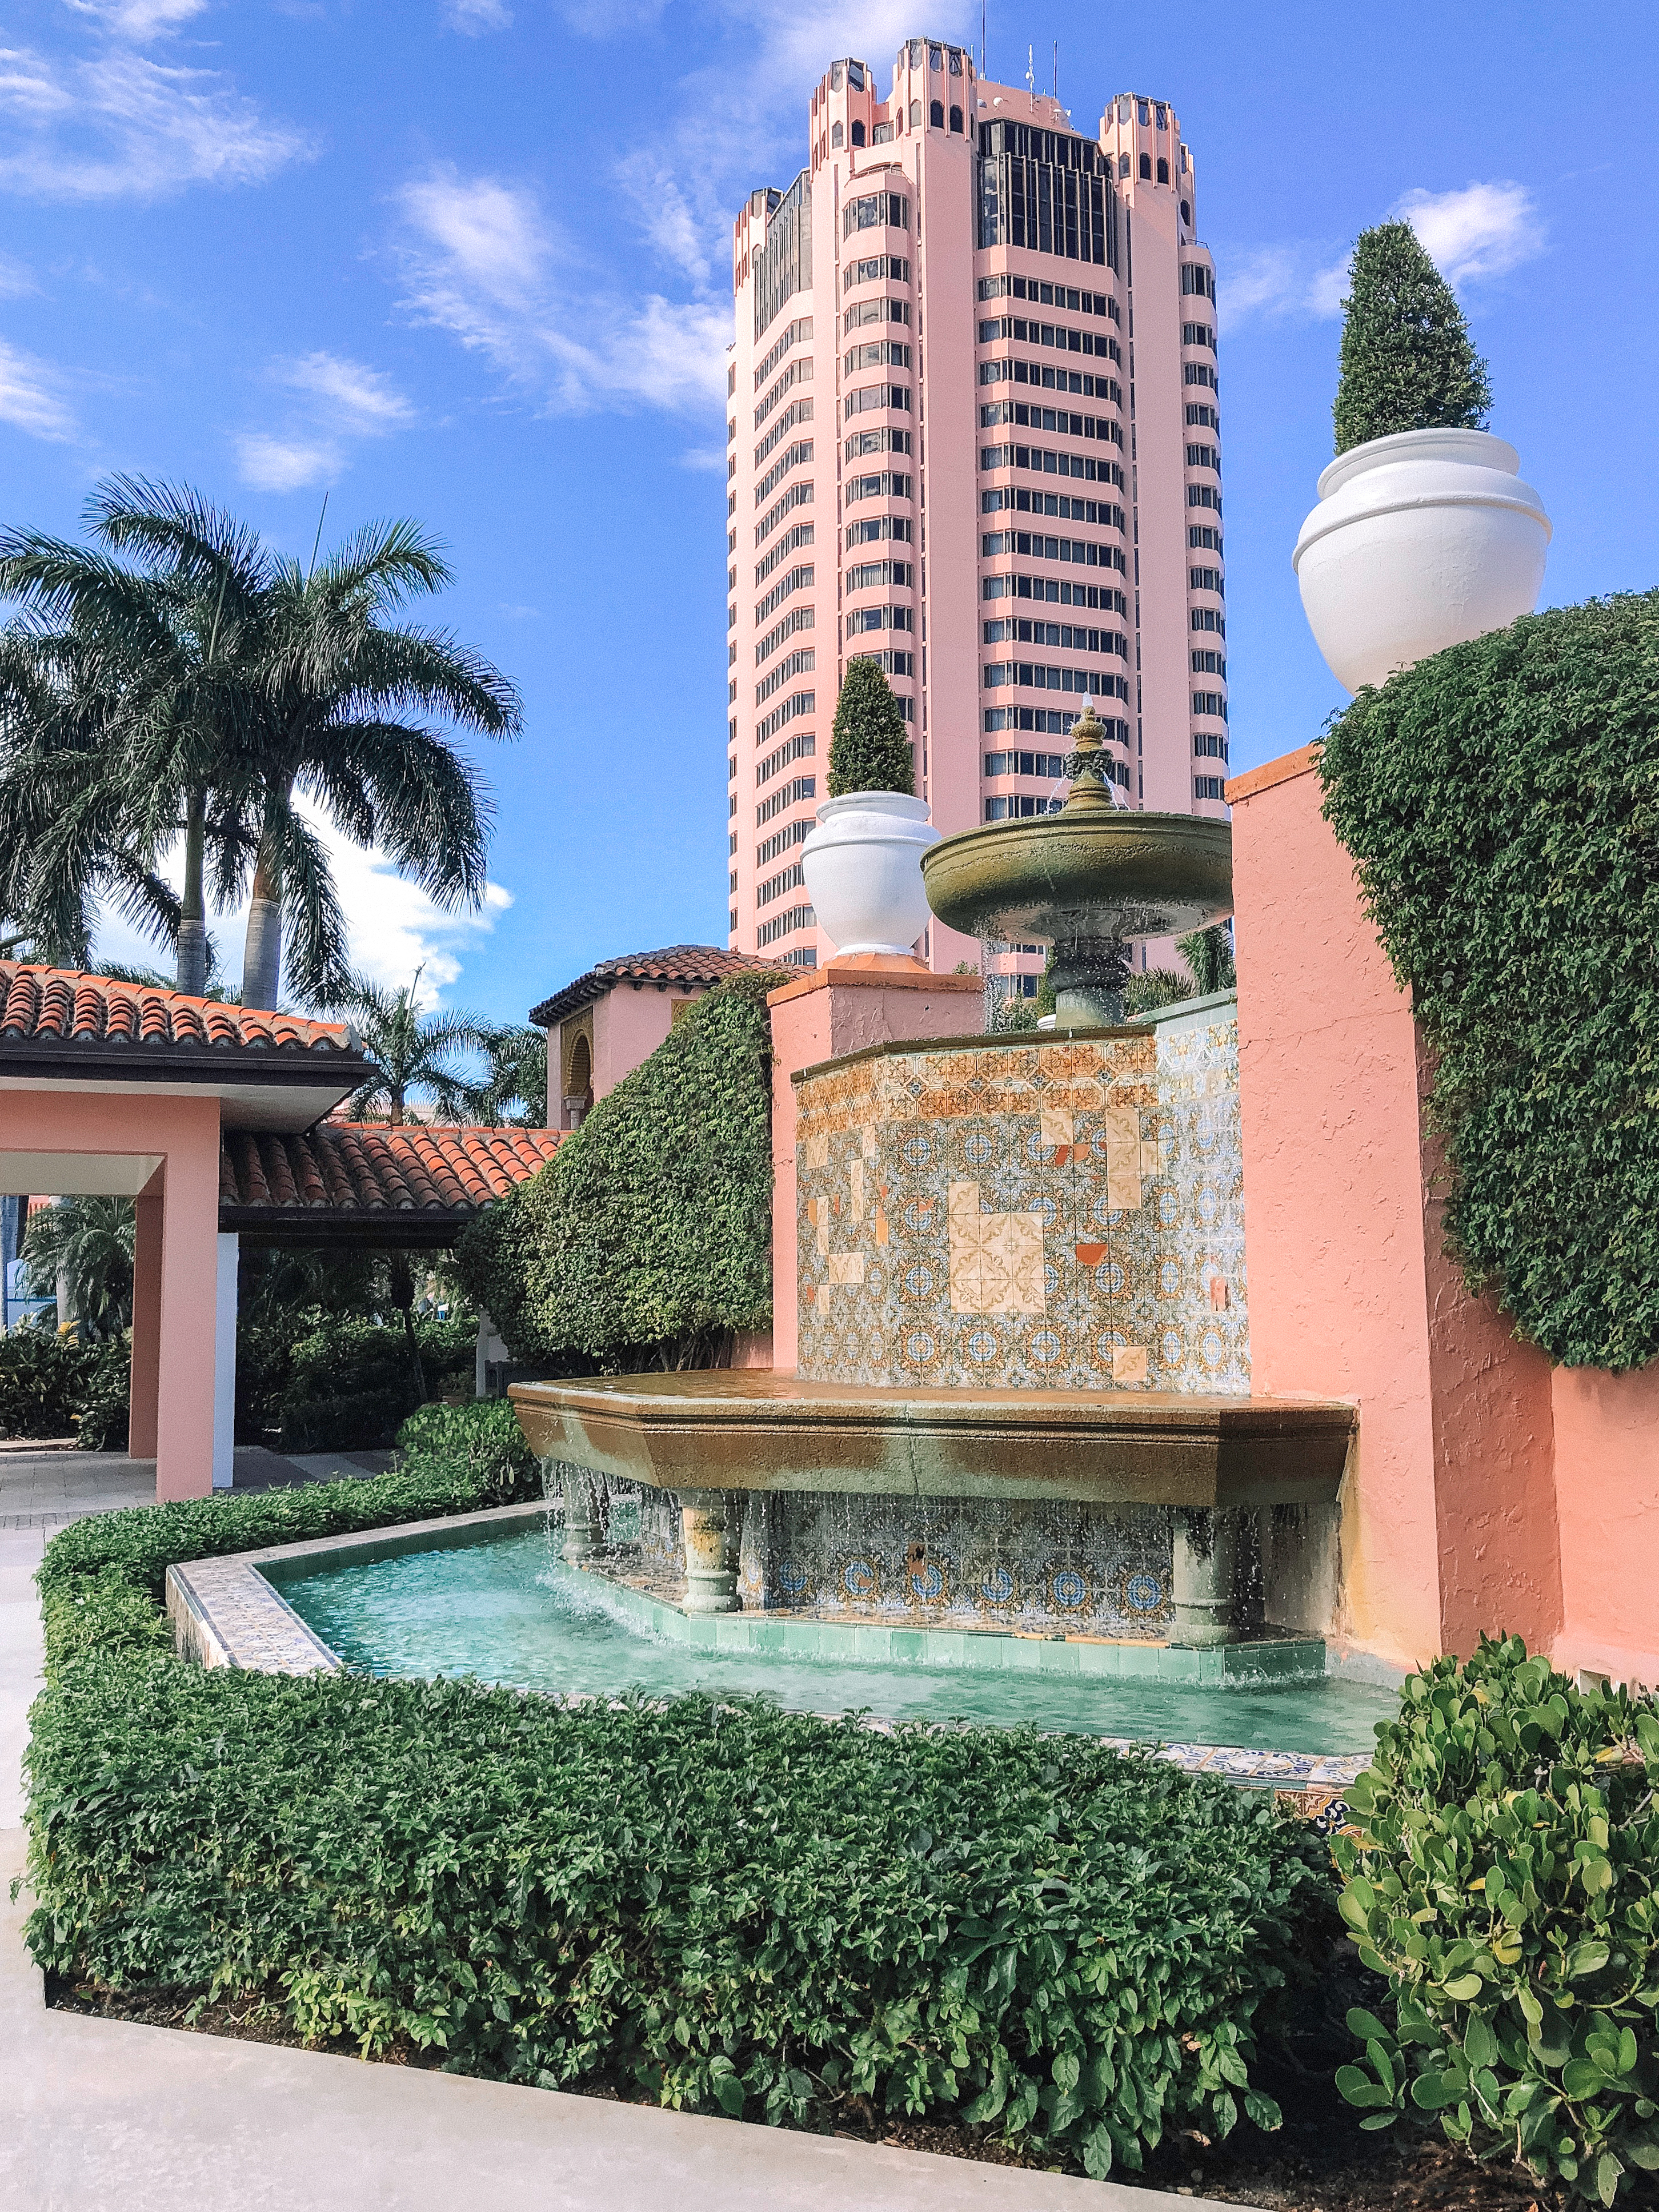 72 hours in boca raton, Florida with the boca resort liv for luxury liv micheli the Boca Resort Tower